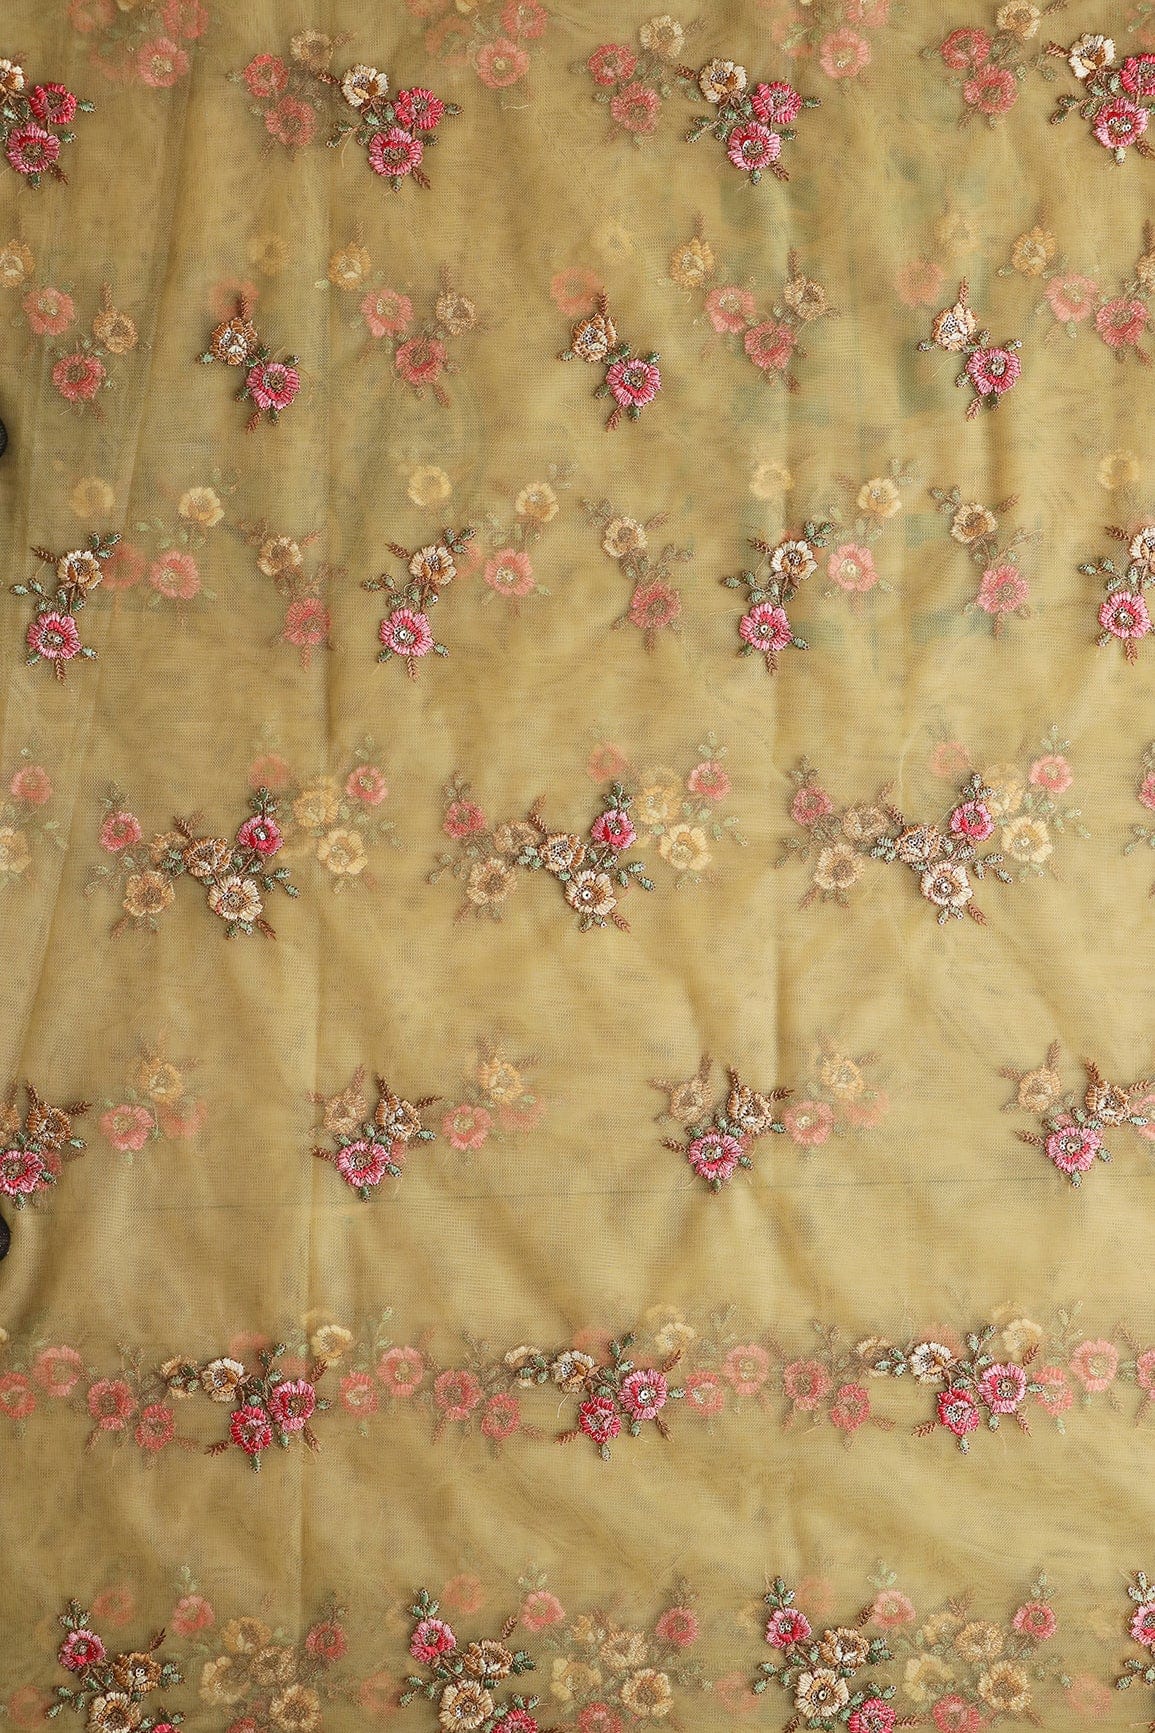 doeraa Embroidery Fabrics 4.50 Meter Cut Piece Of Multi Thread With Sequins Floral Embroidery On Yellow Soft Net Fabric